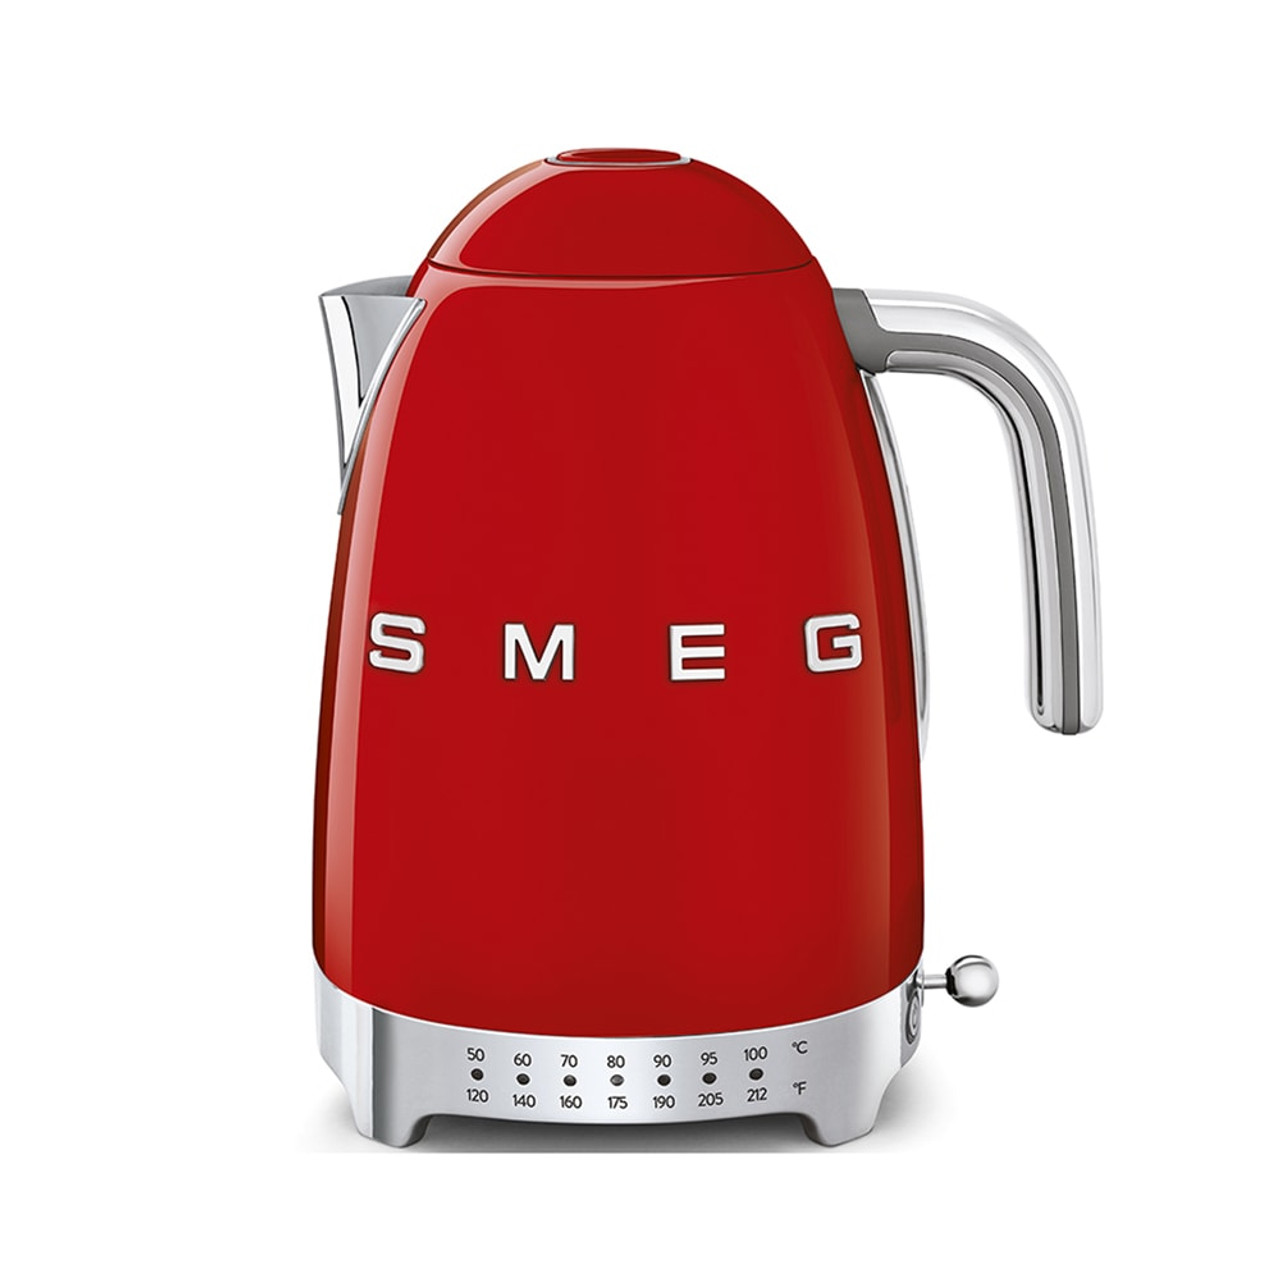 https://cdn11.bigcommerce.com/s-hccytny0od/images/stencil/1280x1280/products/2504/8624/smeg-variable-temperature-kettle-red__45101.1596639546.jpg?c=2?imbypass=on